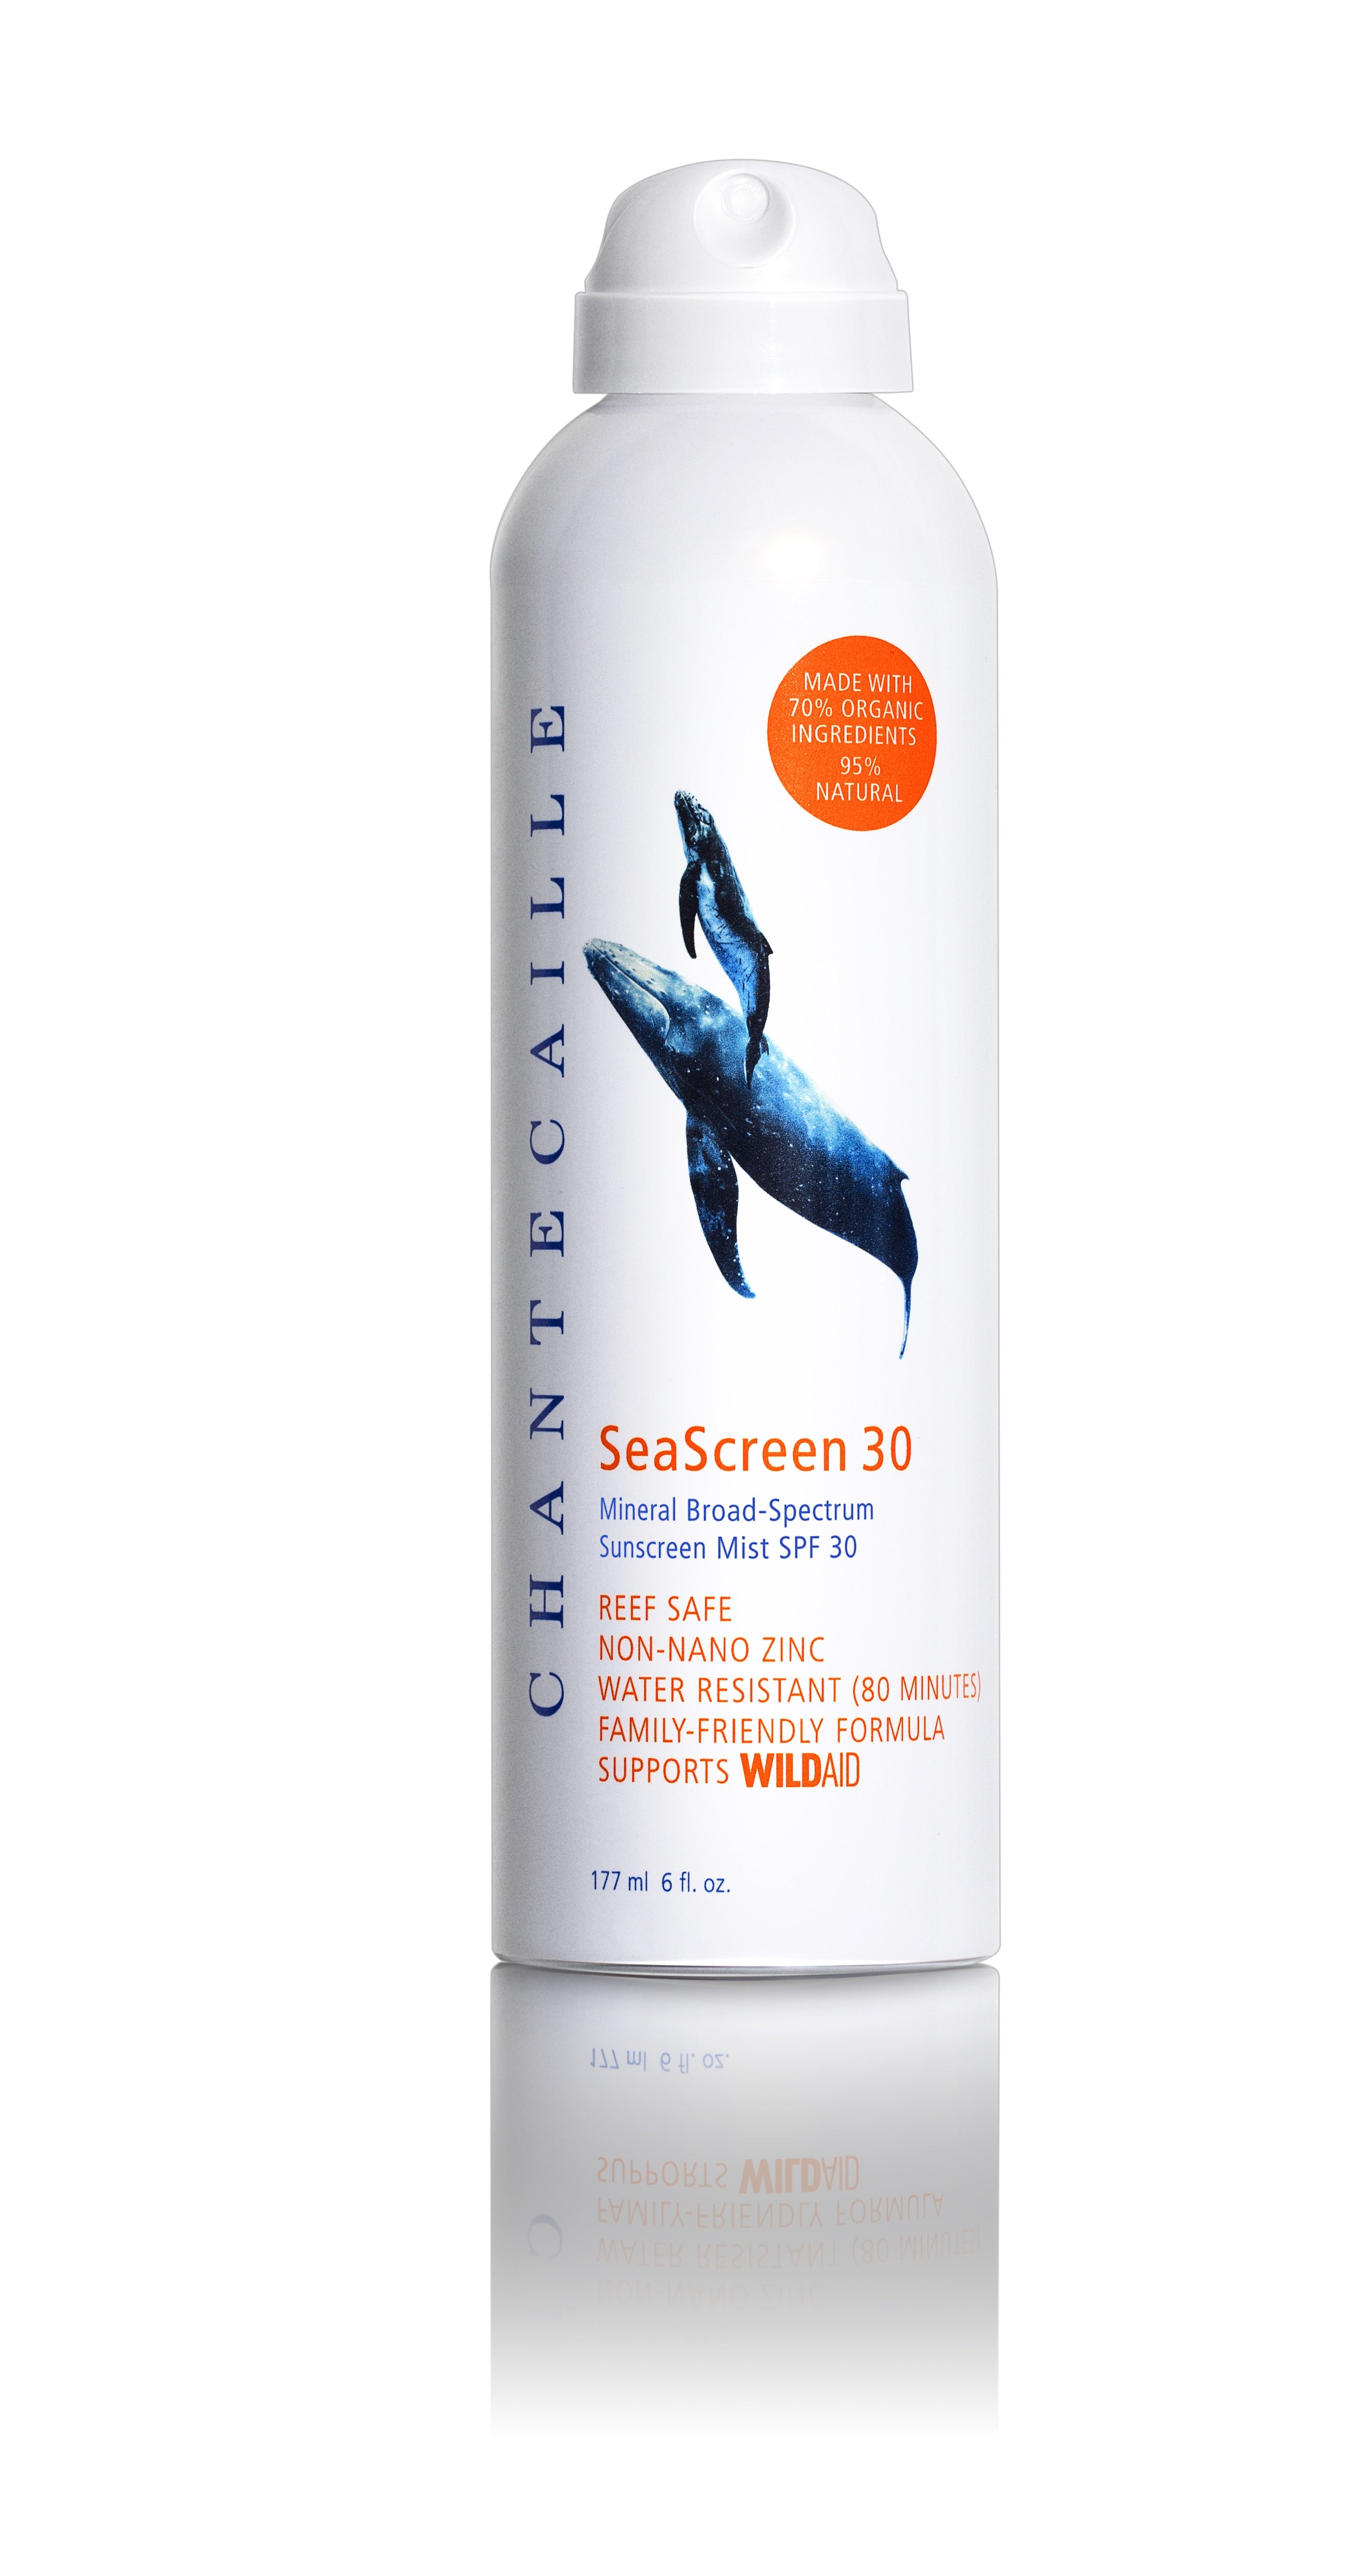 SeaScreen 30 is infused with botanicals that soothe and care for the skin and fend off the redness and dehydration that accompanies time spent in the sun